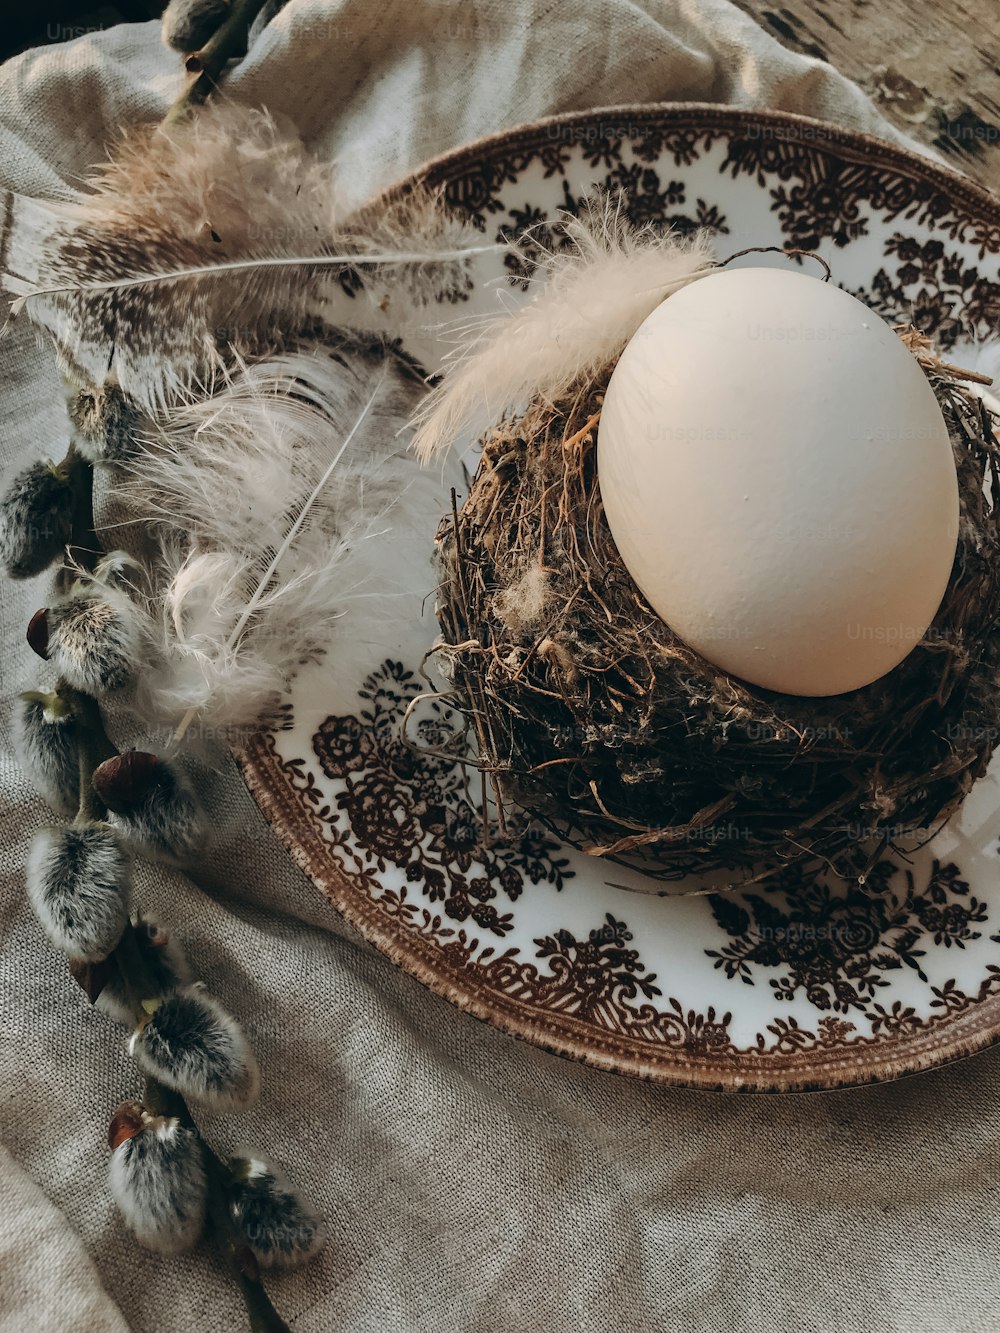 Natural easter egg in nest, vintage plate, soft feathers, linen napkin, pussy willow branches on aged wooden table.Stylish rustic Easter table setting.  Rural Easter still life